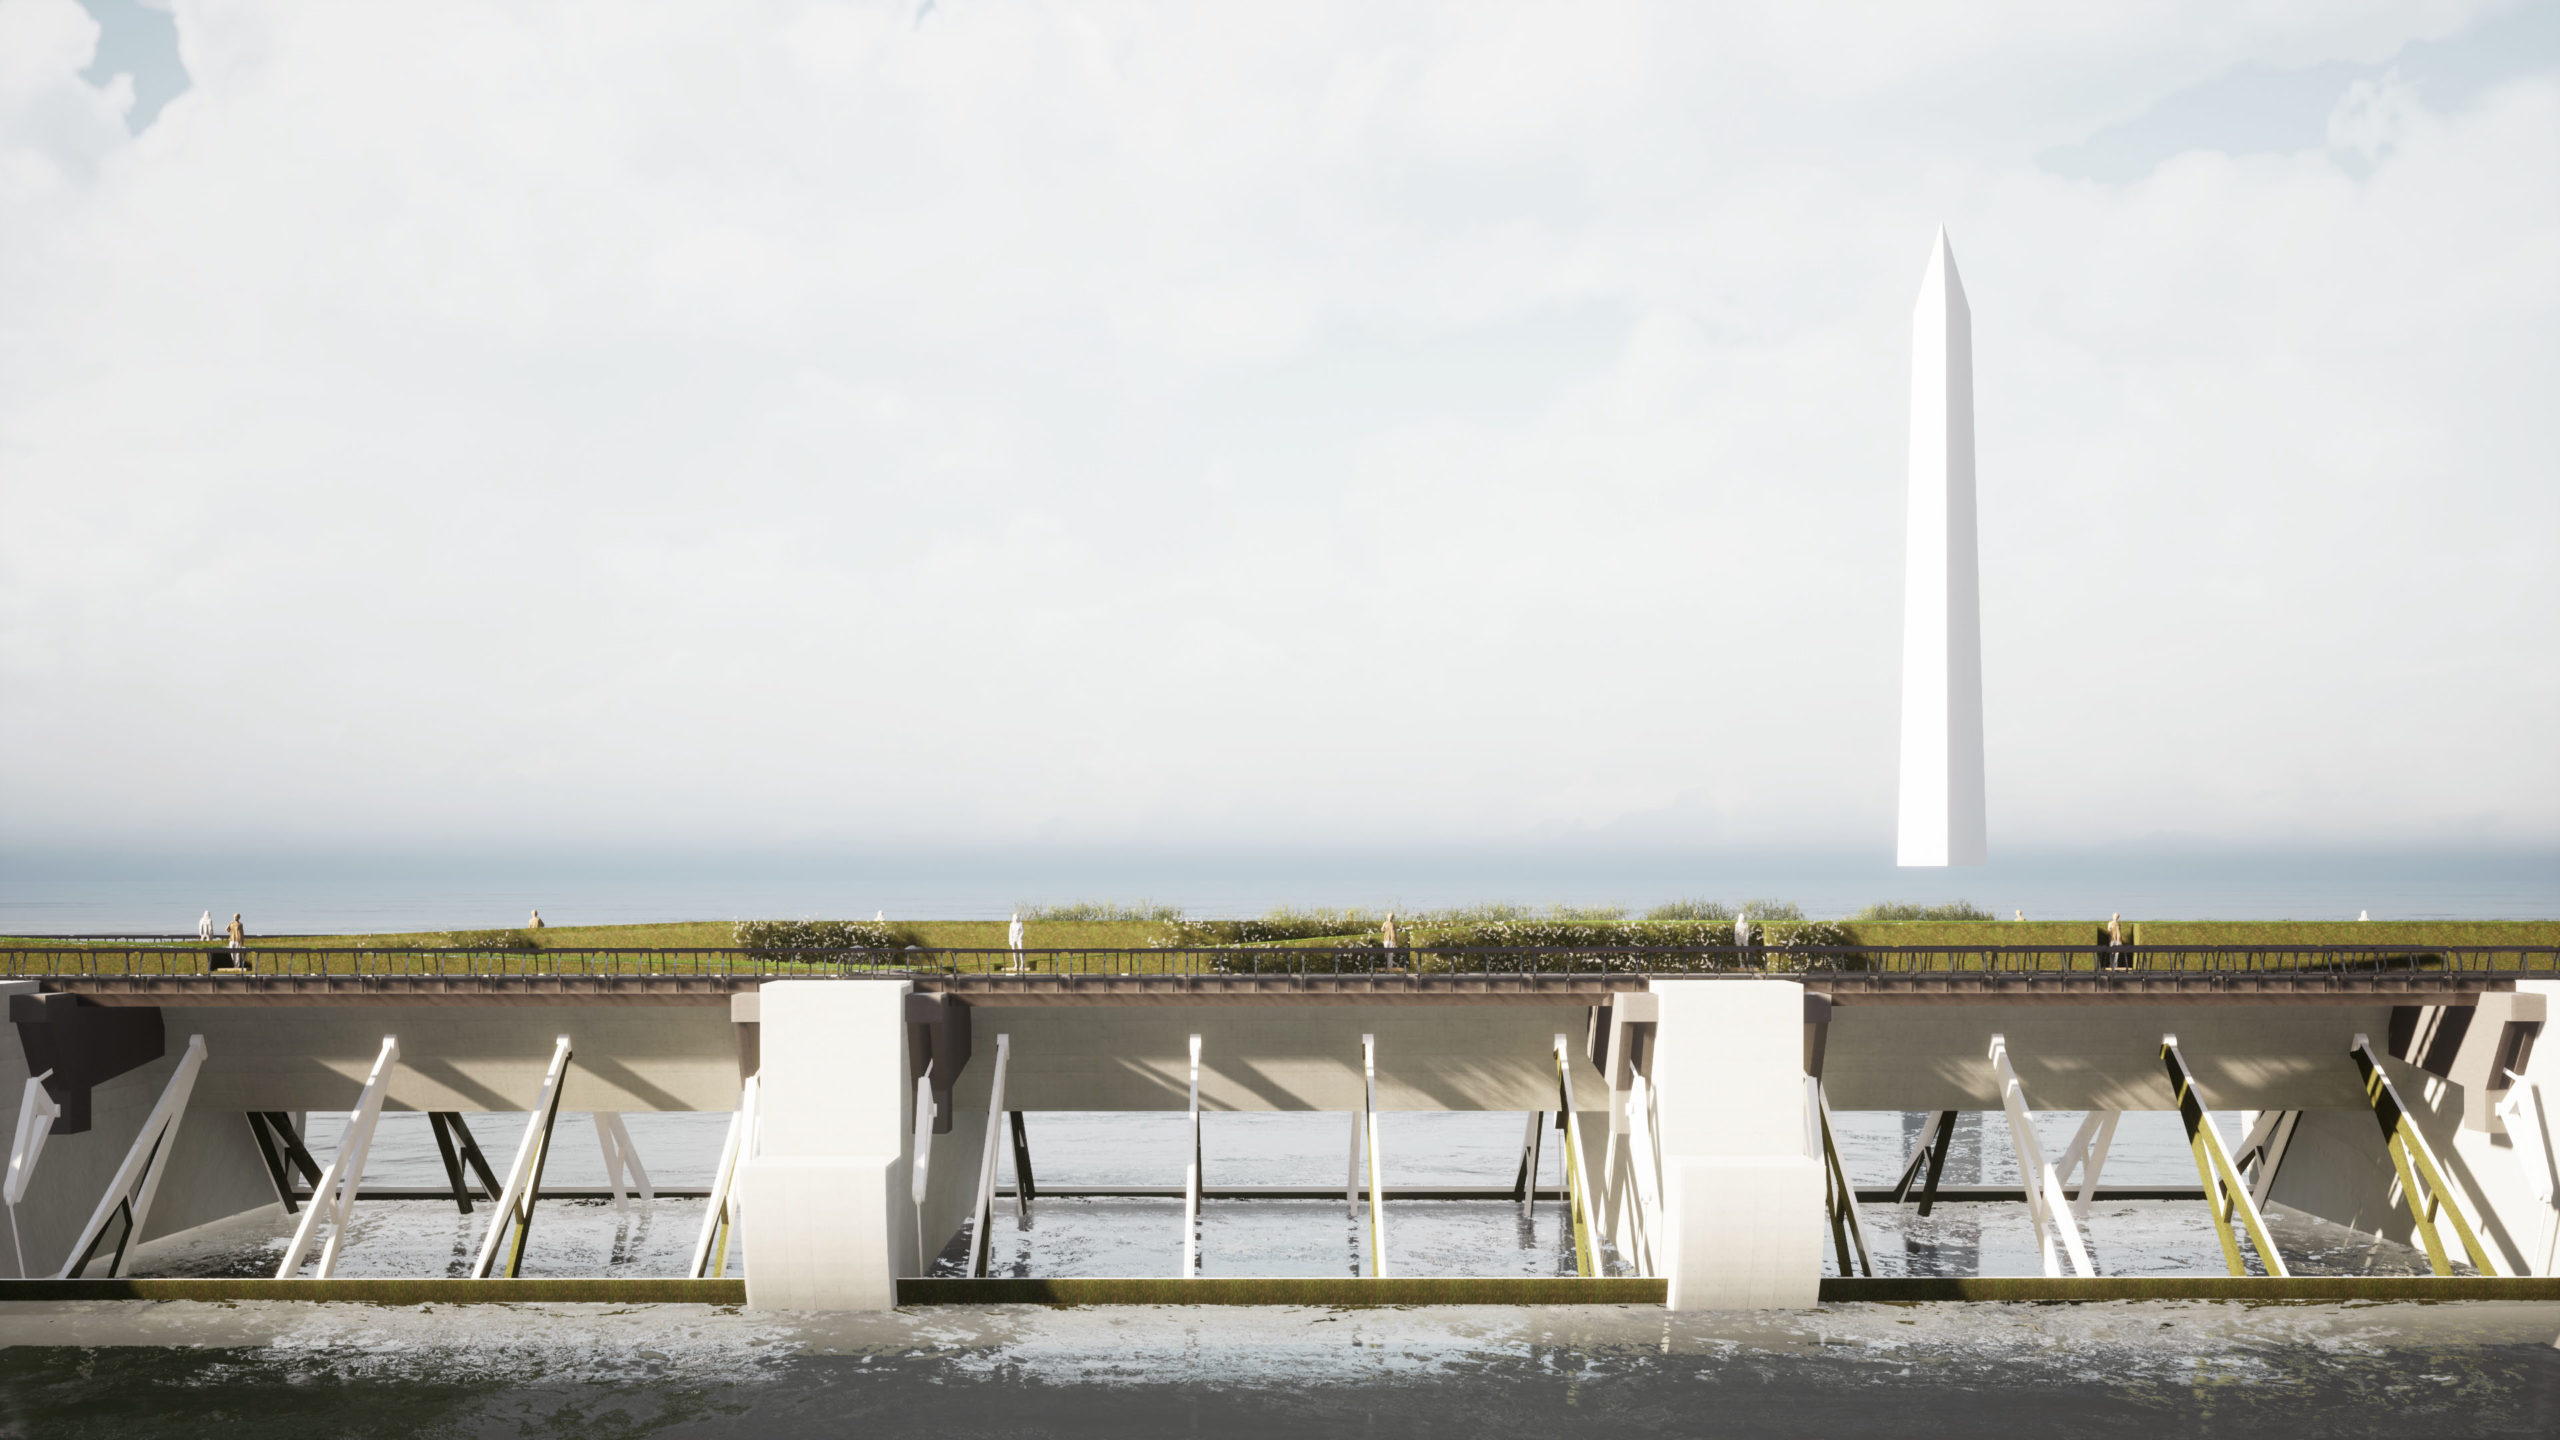 Rendering of the side of the bridge with the Washington Monument in the distance.